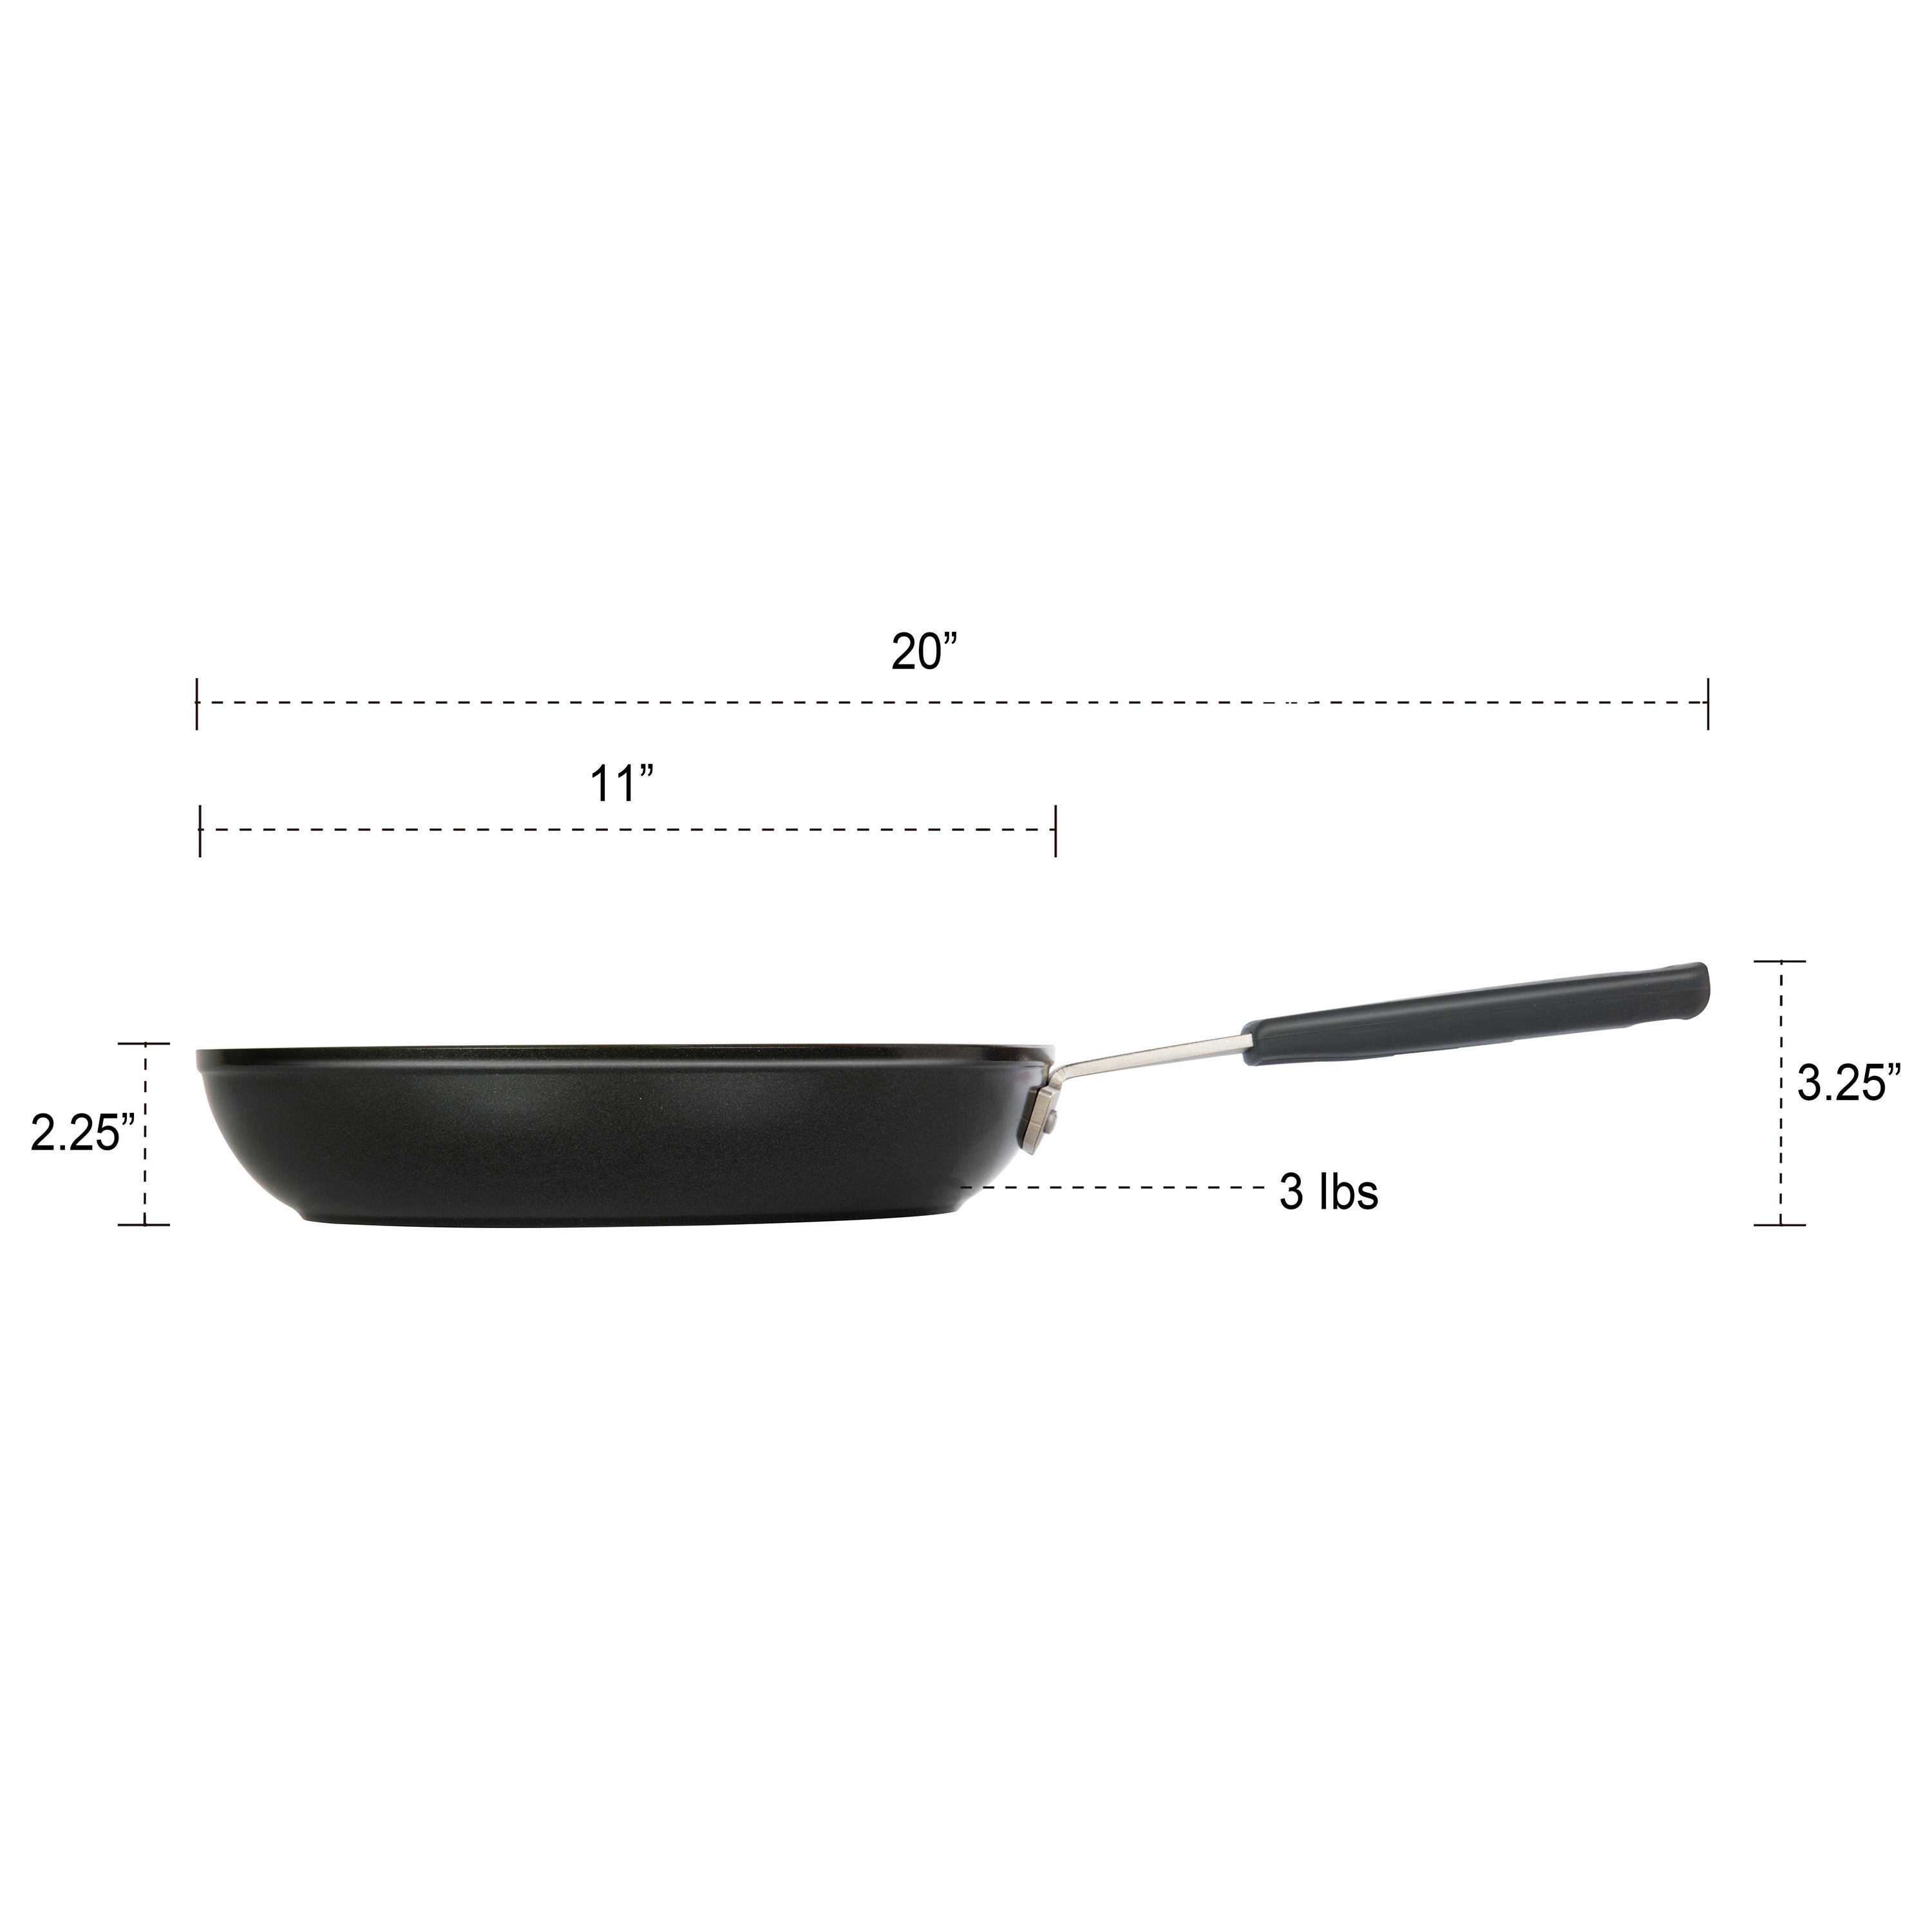 MASTERPAN Ceramic Nonstick Frypan & Skillet with Chefs Handle, 11